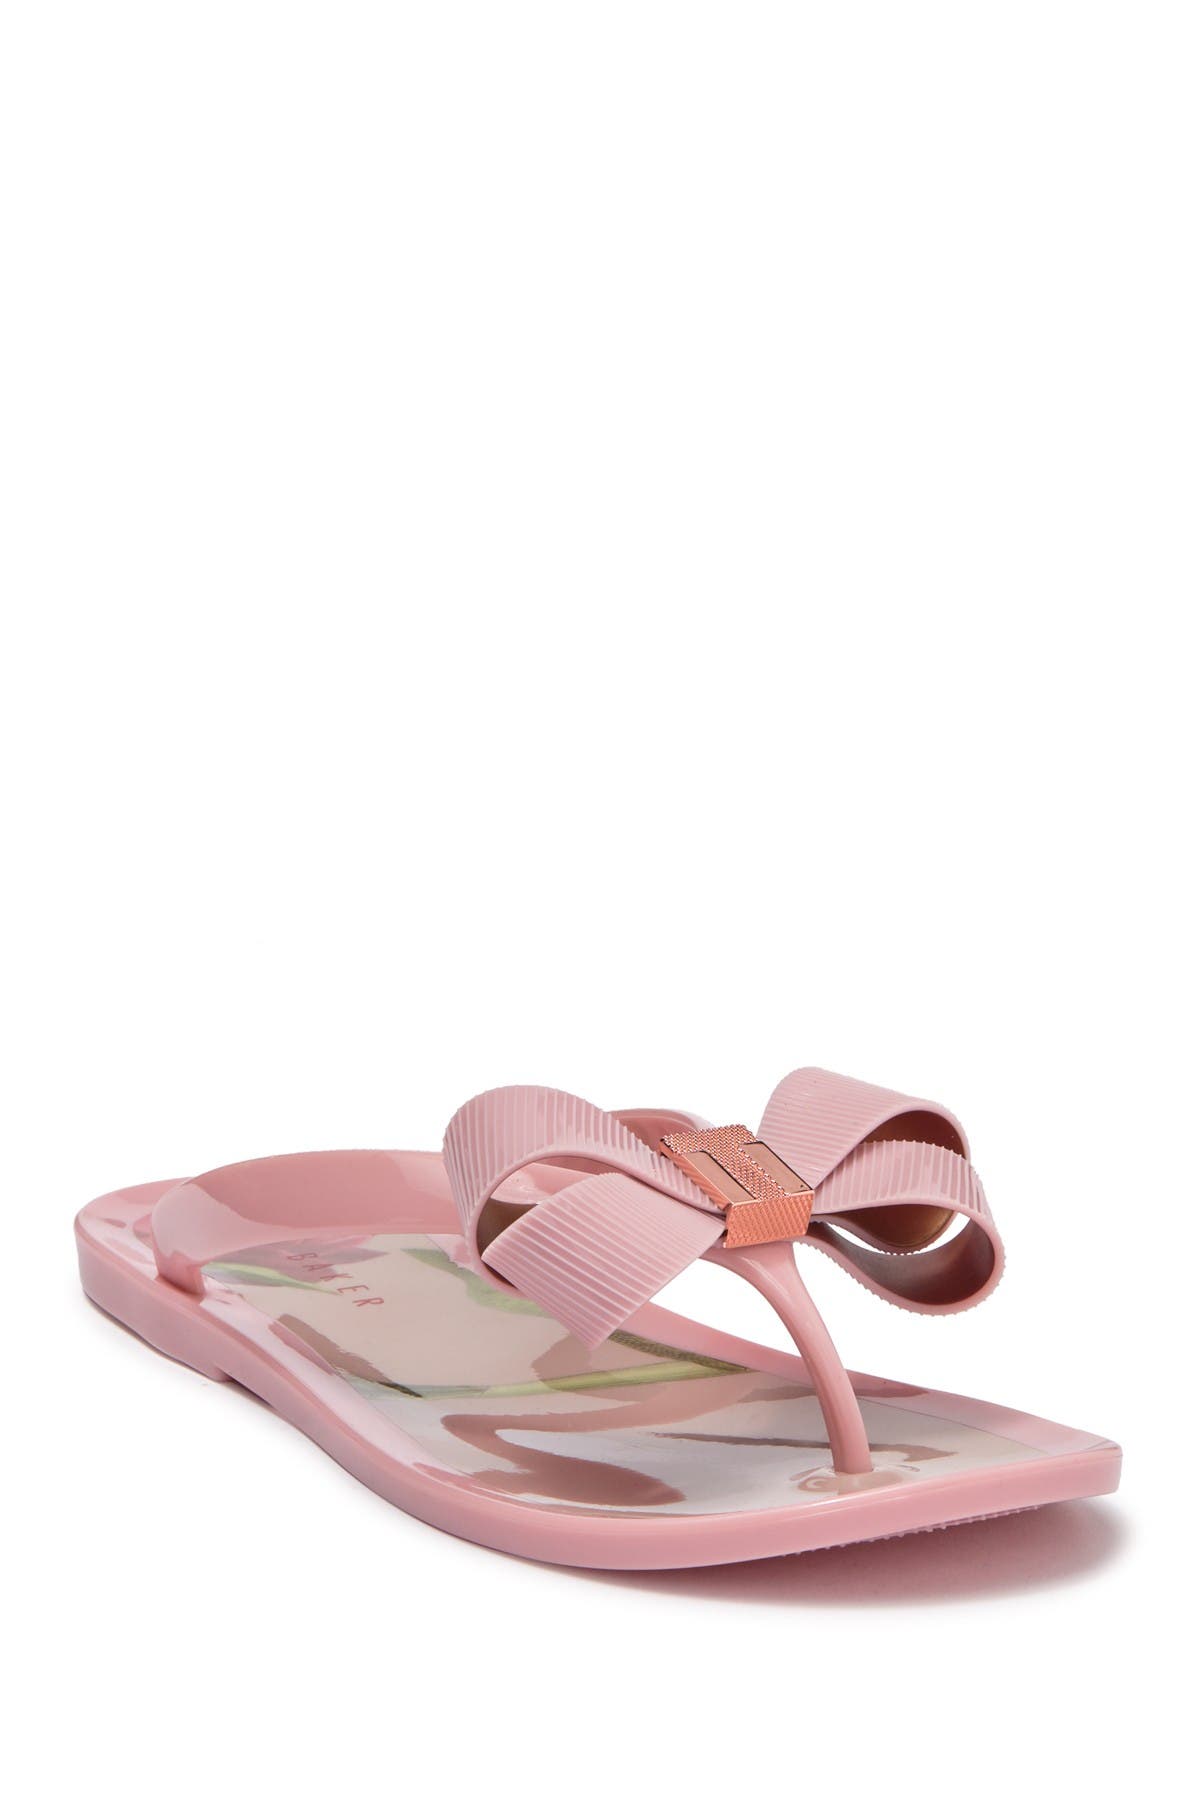 Ted Baker London | Susie P Bow Flip 